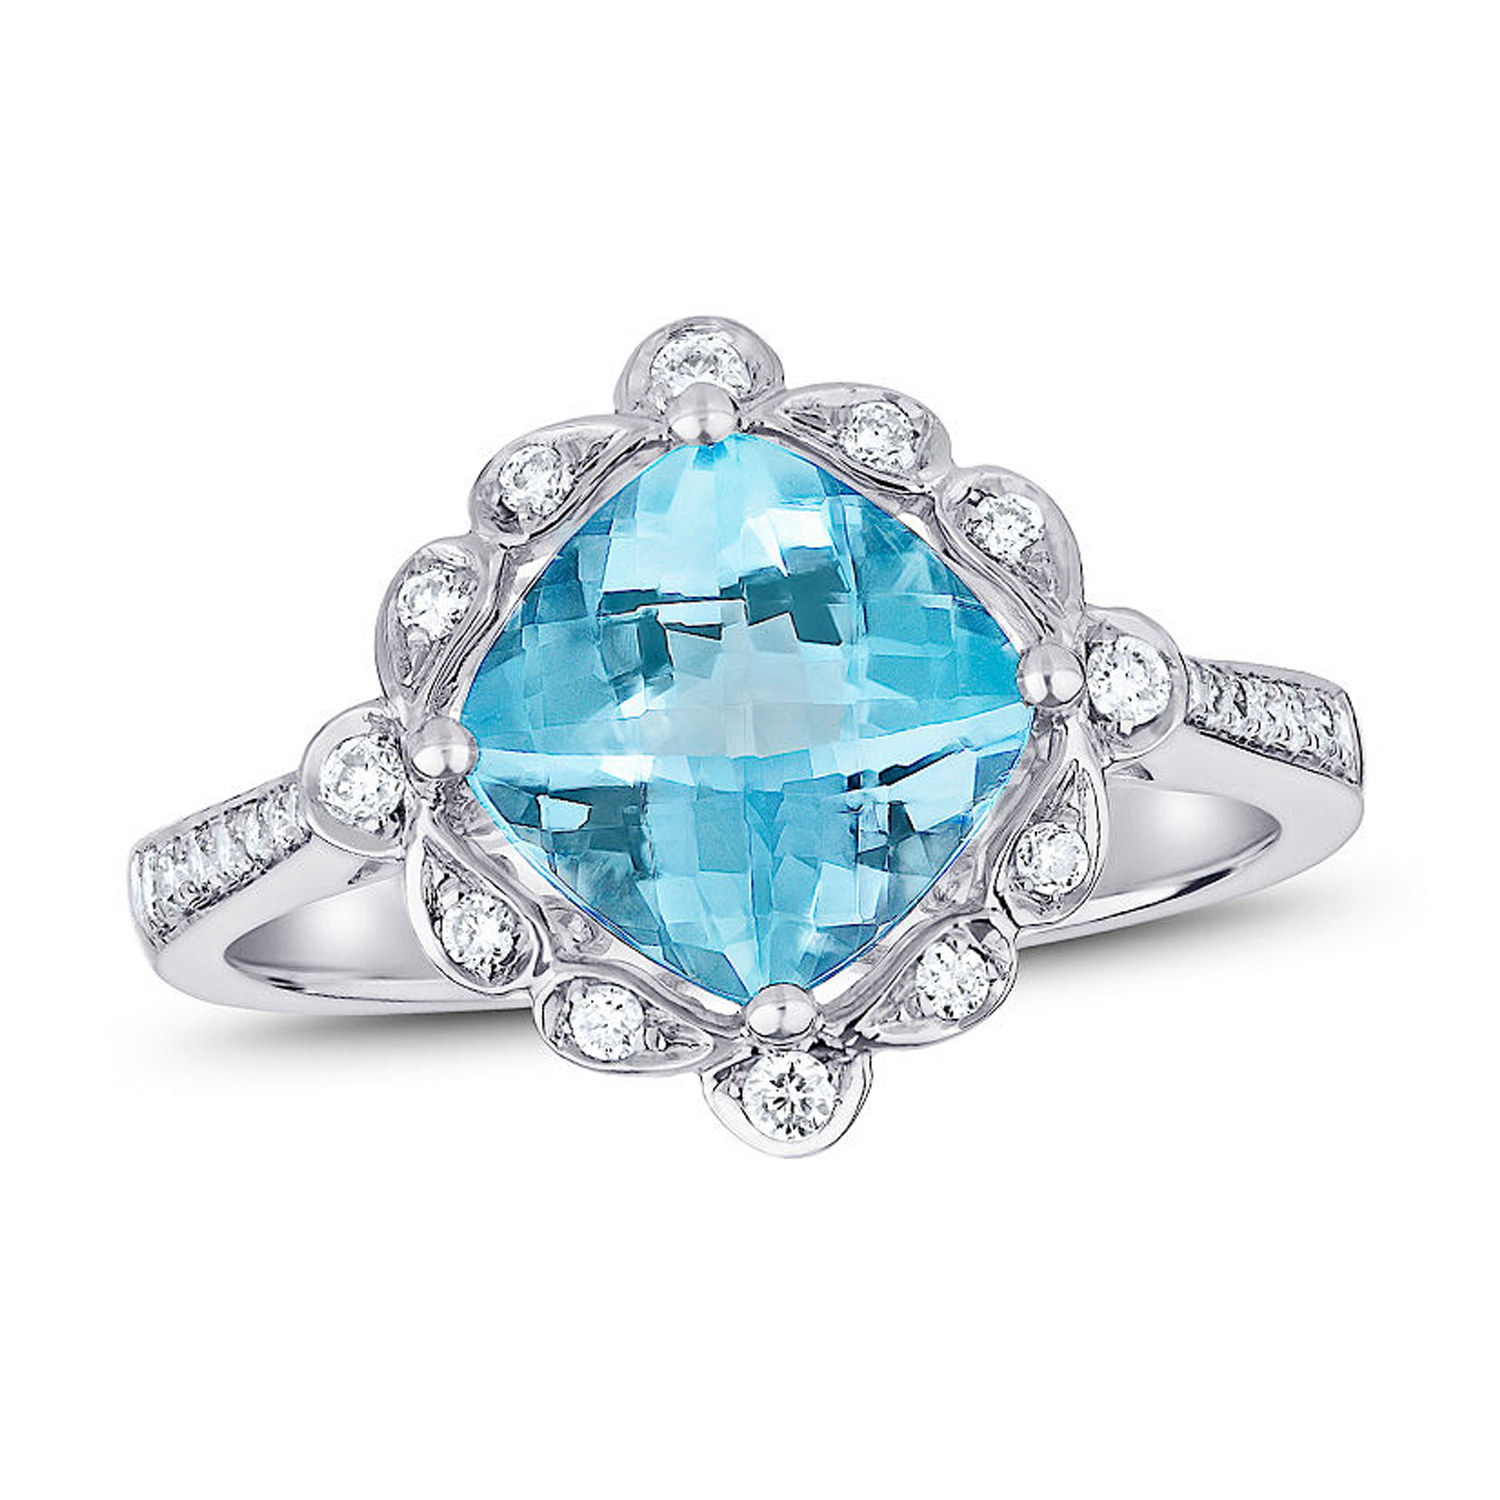 View 2.60ctw Blue Topaz and Diamond Ring in 14k White Gold